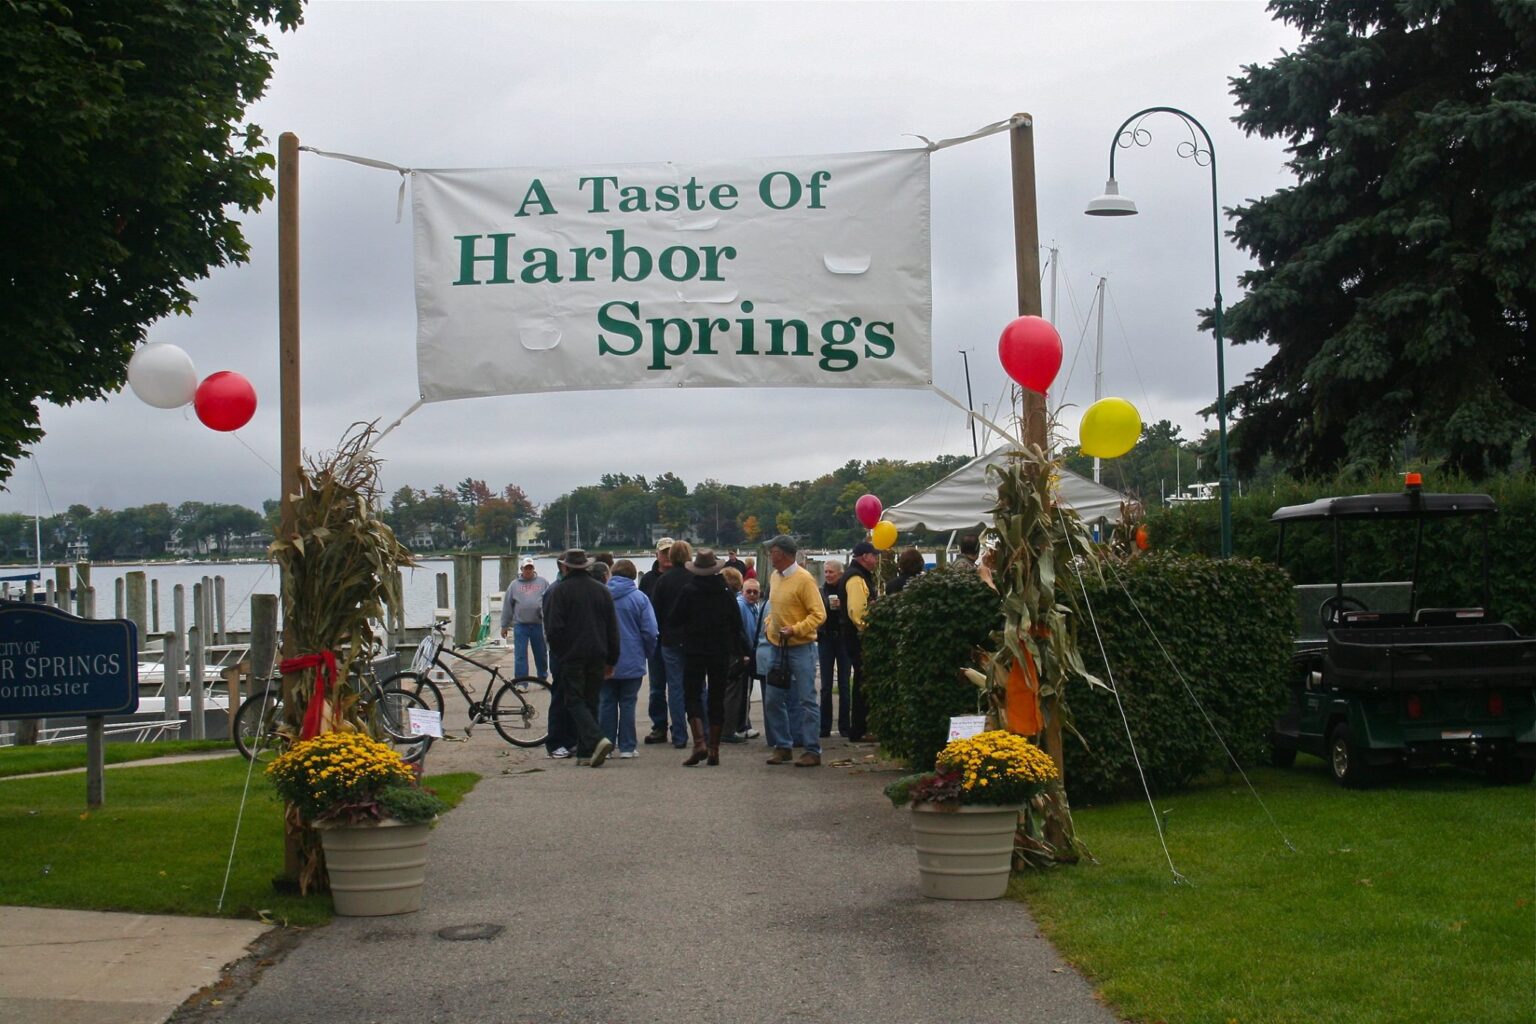 Festivals & Events in Harbor Springs Northern Michigan Guides